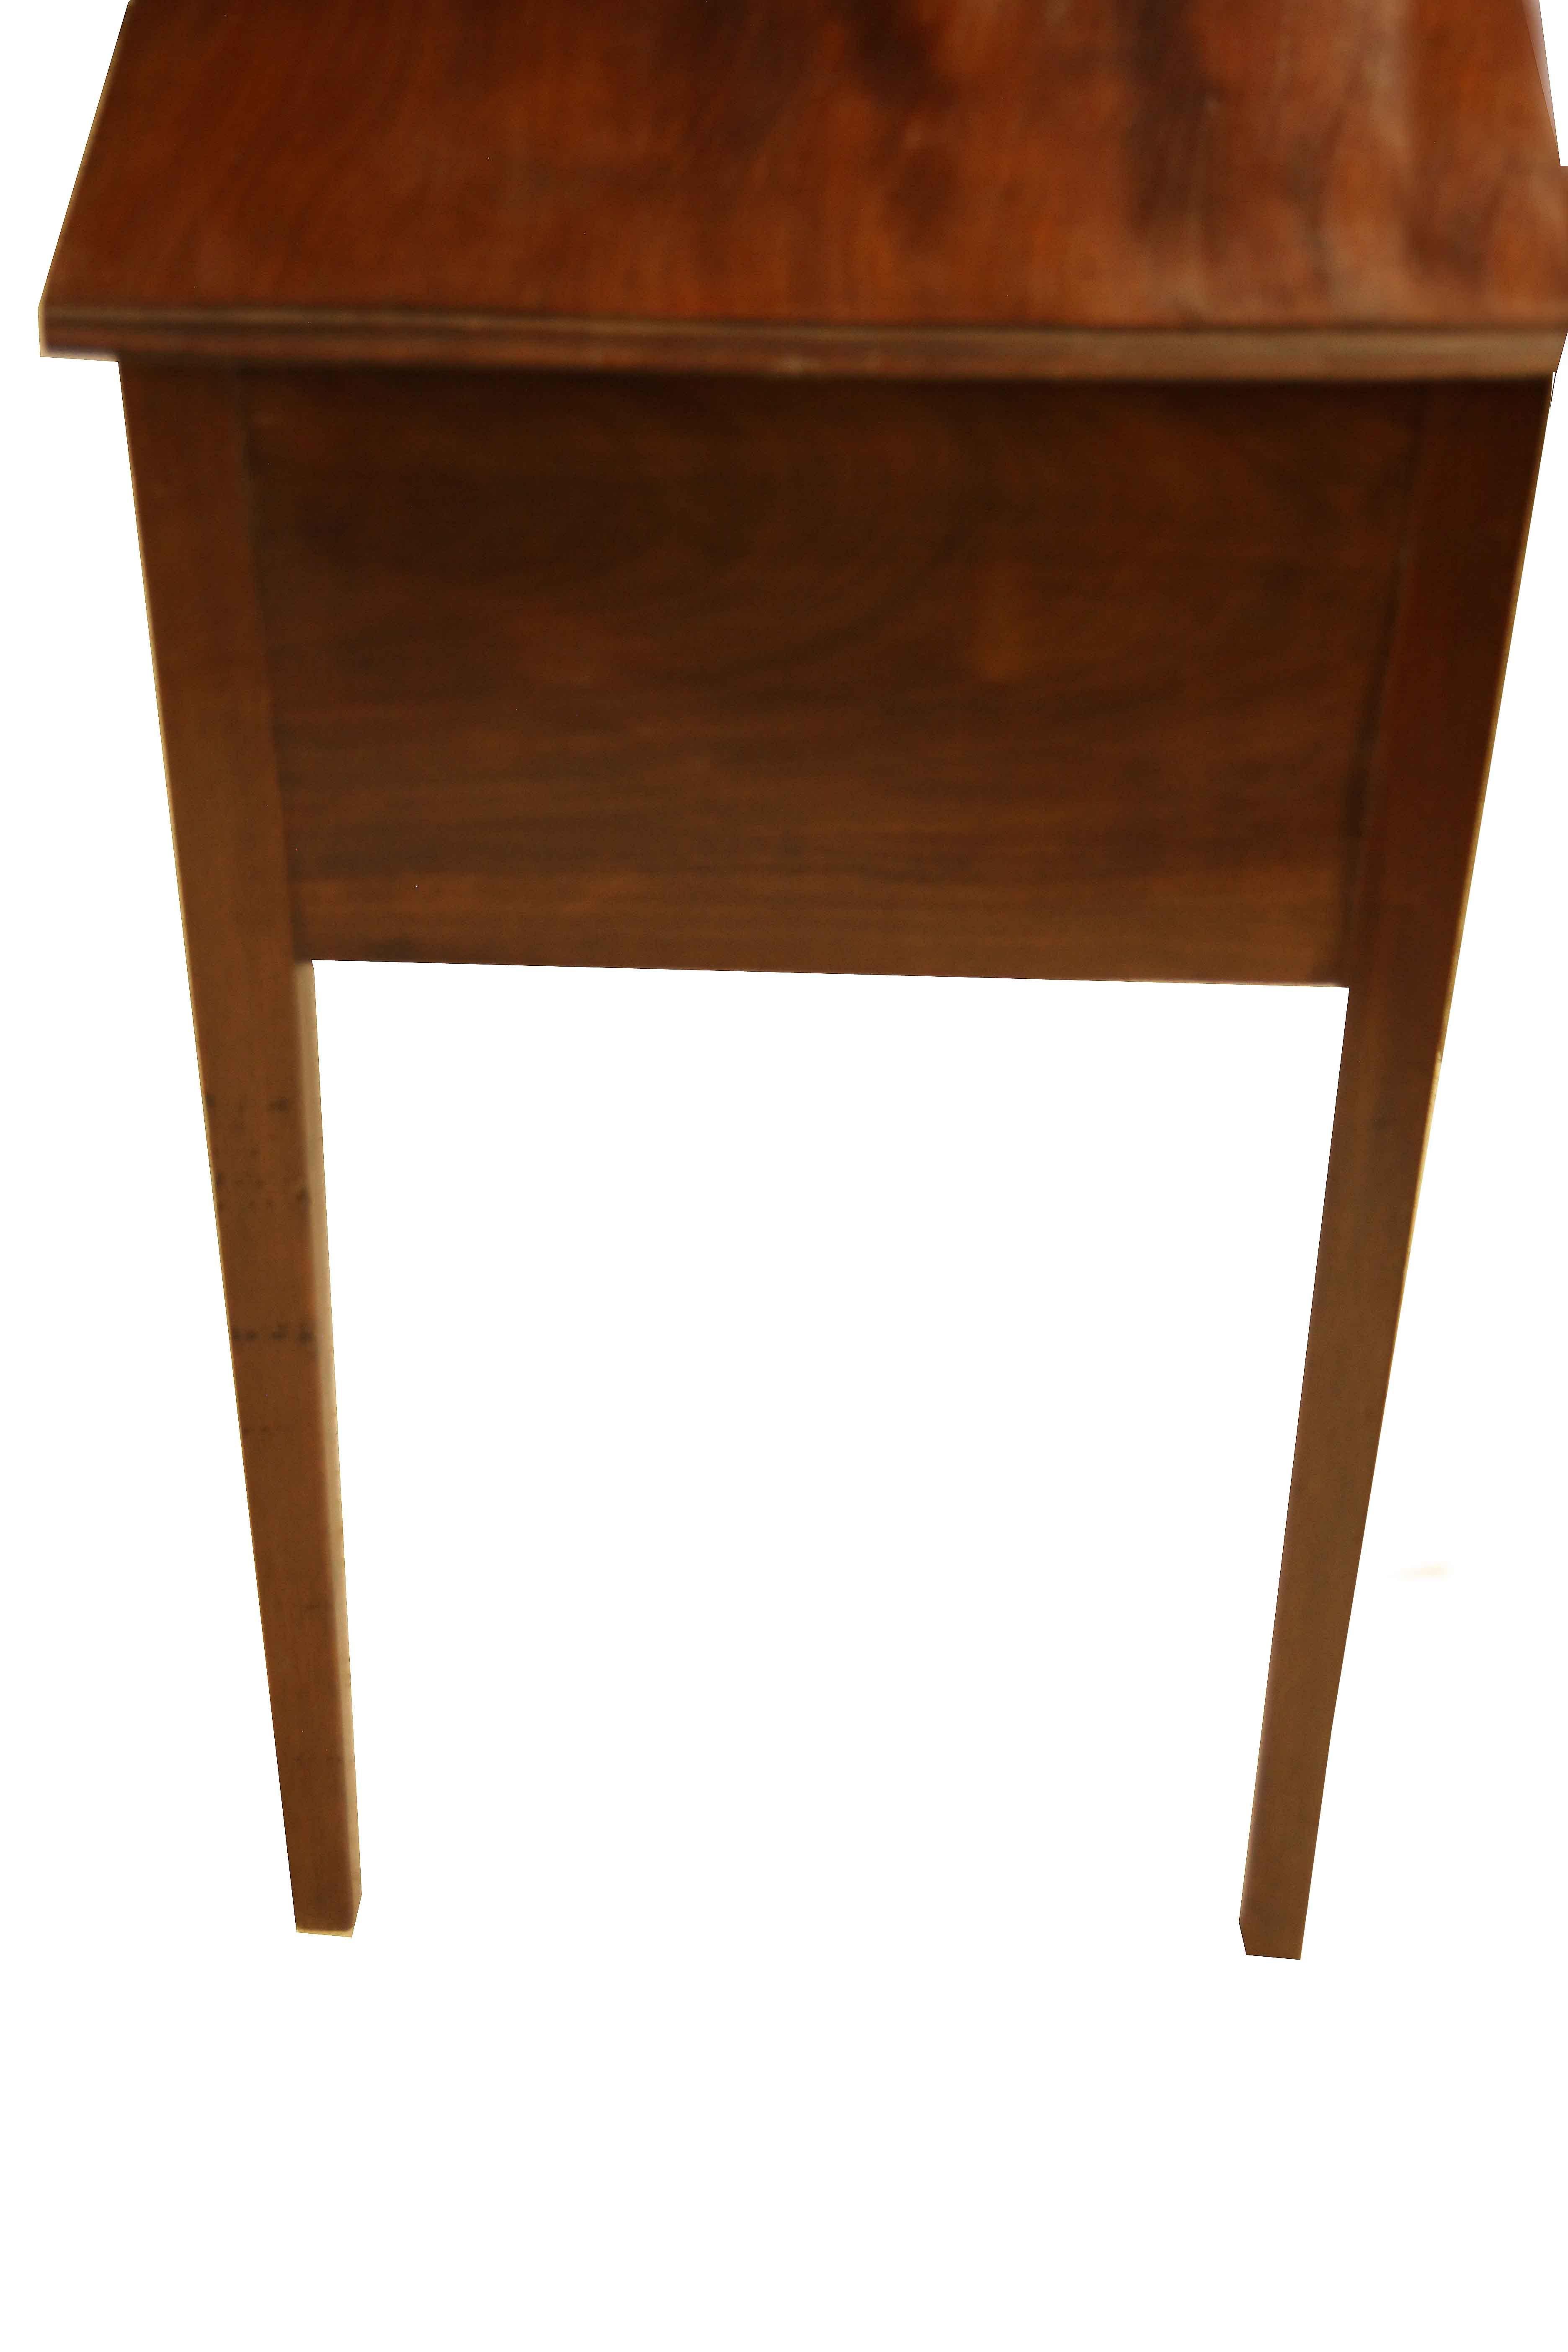 English Hepplewhite mahogany lowboy, the top has outstanding figured grain along with beautiful color and patina. The two small drawers over one long drawer have the original delicate ring pulls, oak secondary wood; tapered legs.